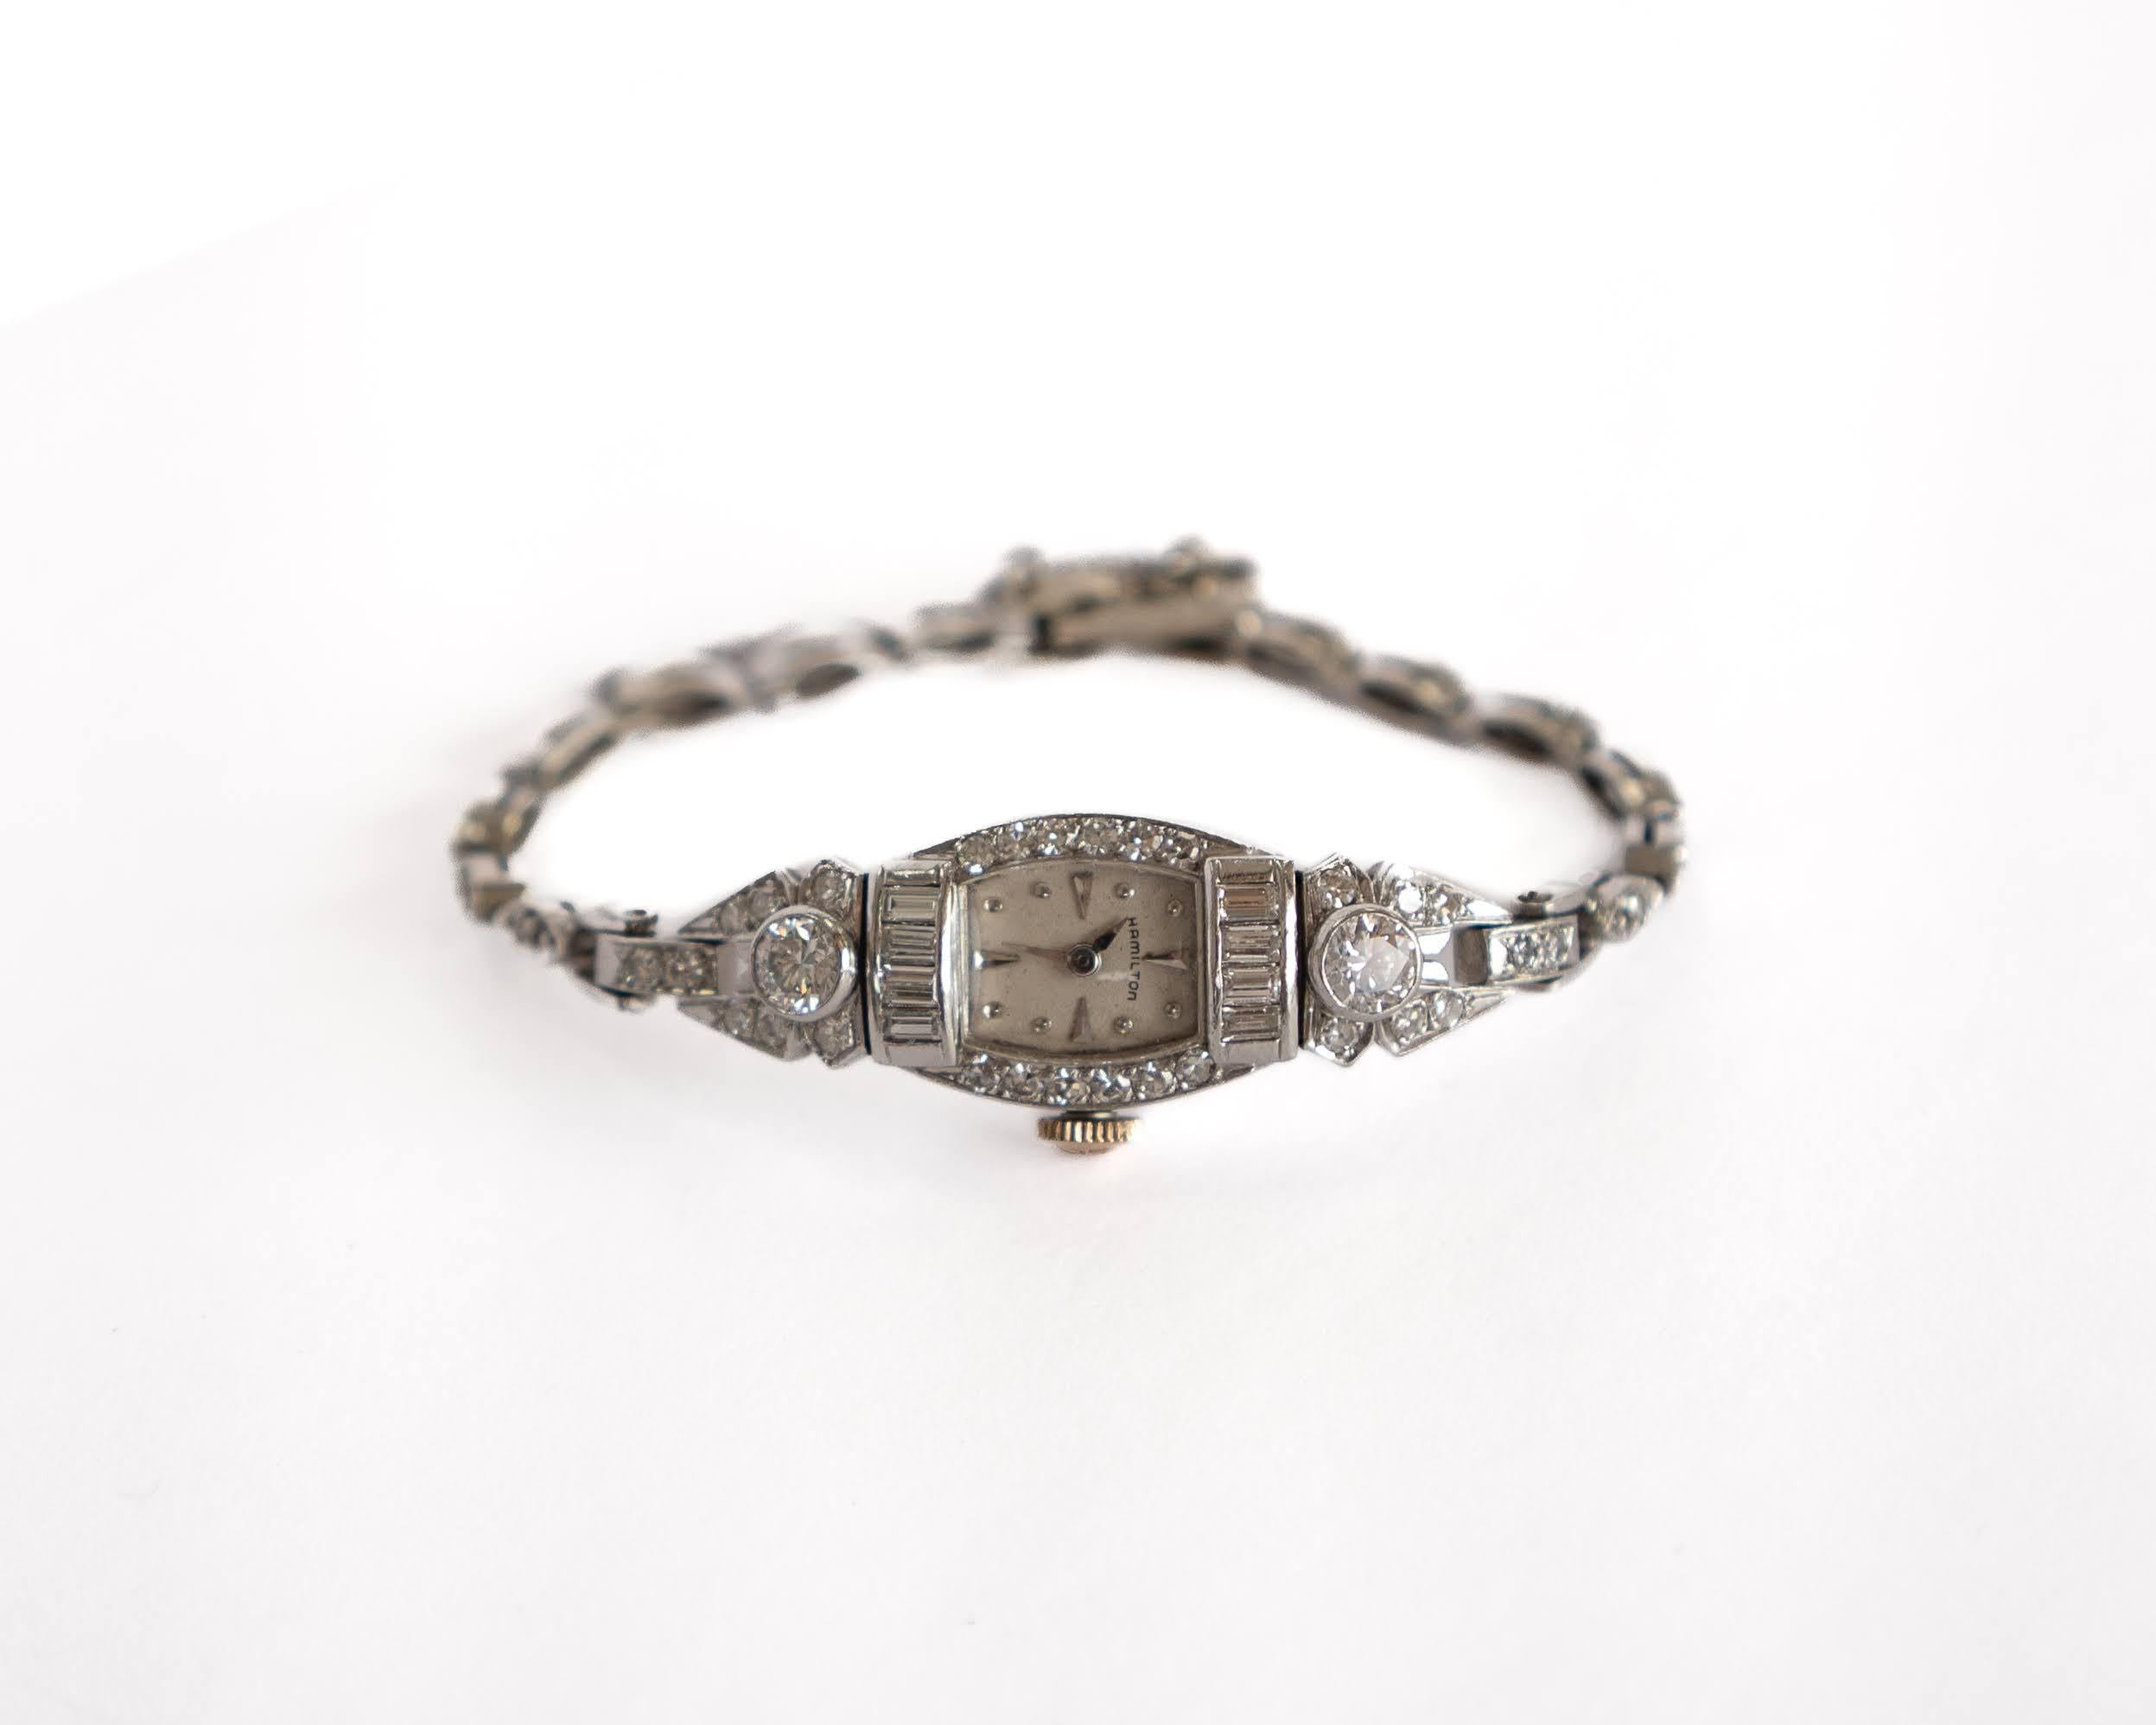 For a fancy night out, or a casual evening this watch is great for elegant touch to your appearance. This vintage 14K White gold watch and 14K white gold link-style bracelet has 2 round bezel settings, 8 rectangular channel settings, and 41